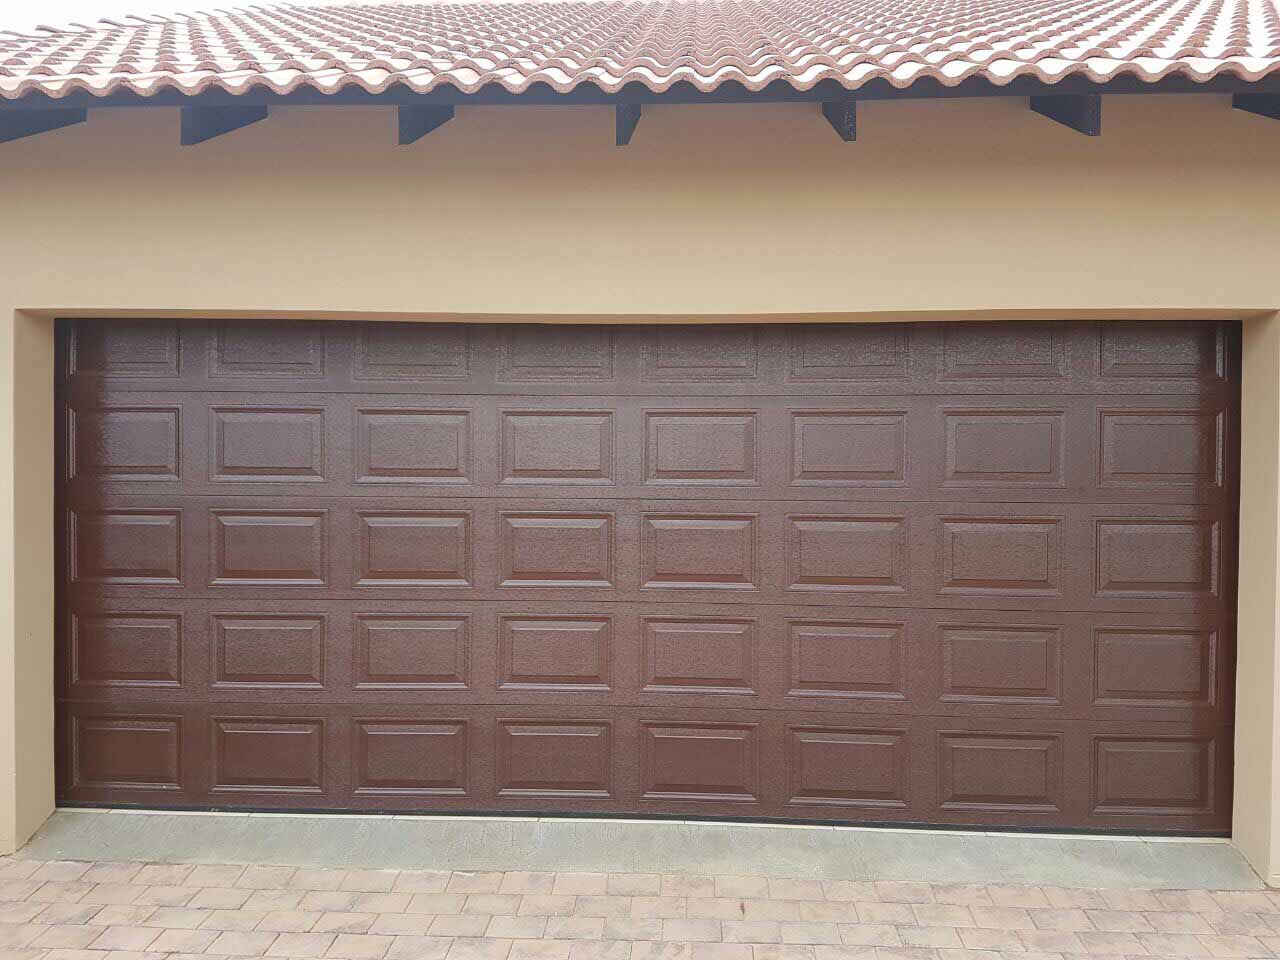 Simple Garage Roller Door For Sale Durban for Small Space